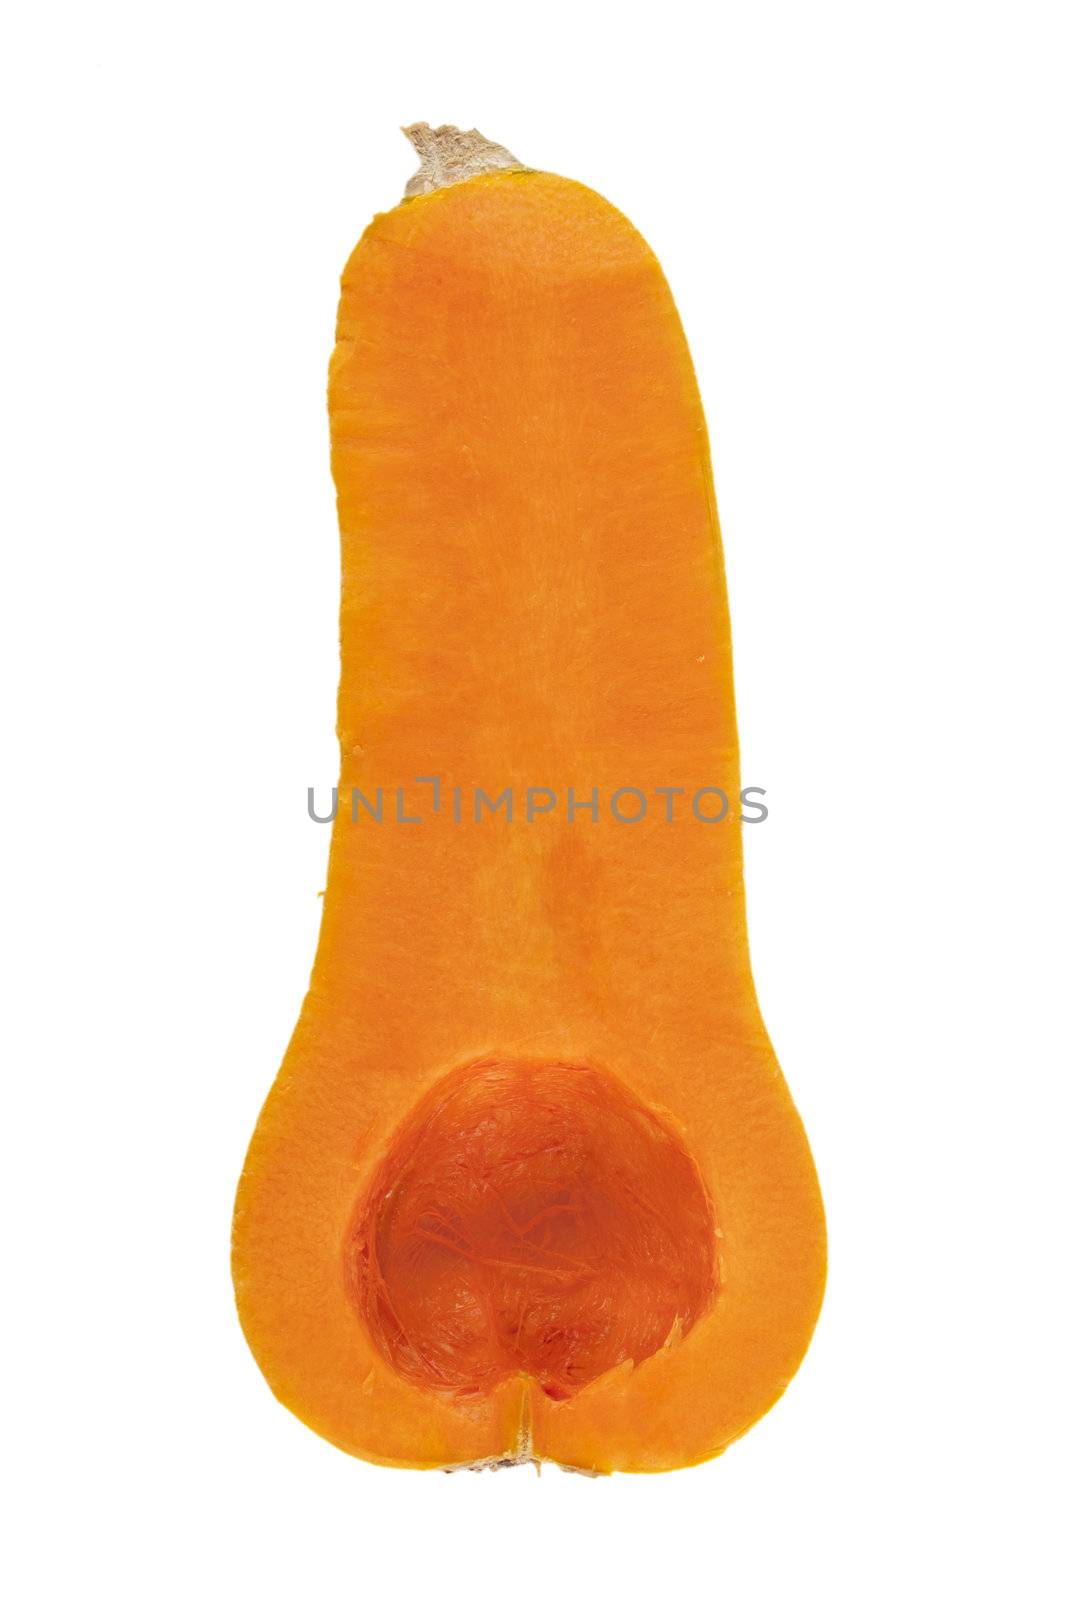 Cross section of a butternut squash with seeds removed, isolated on a white background.